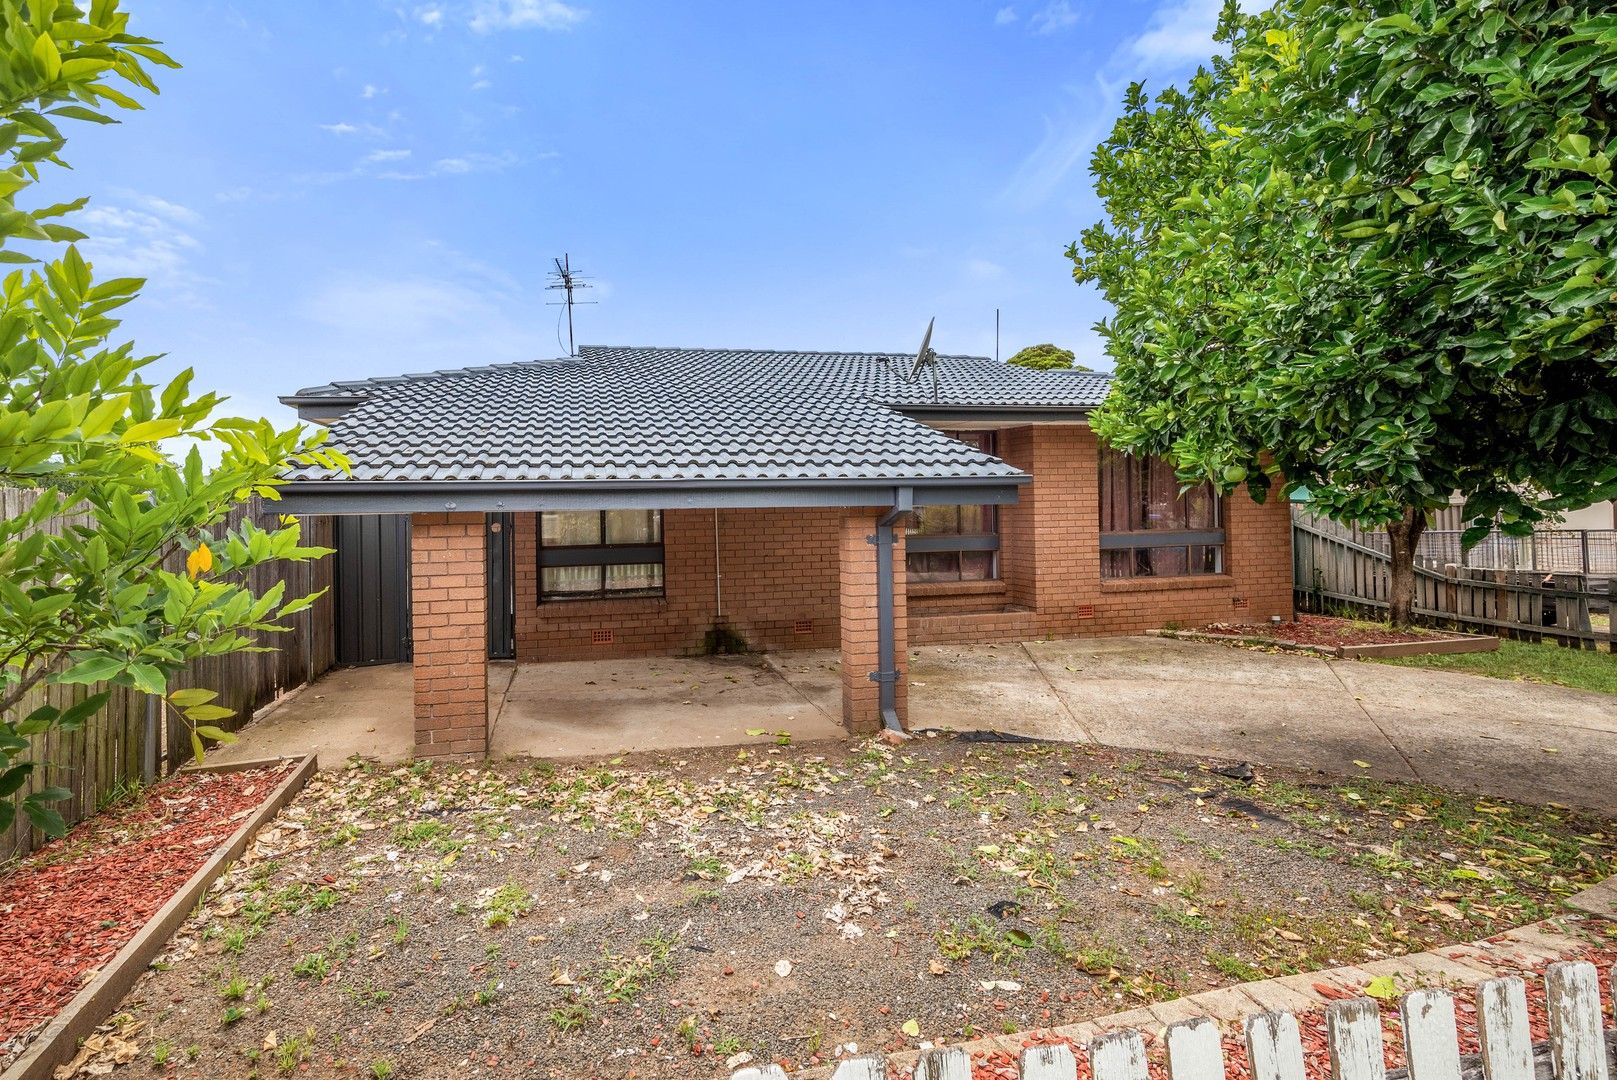 3 bedrooms House in 10 Kew Way AIRDS NSW, 2560